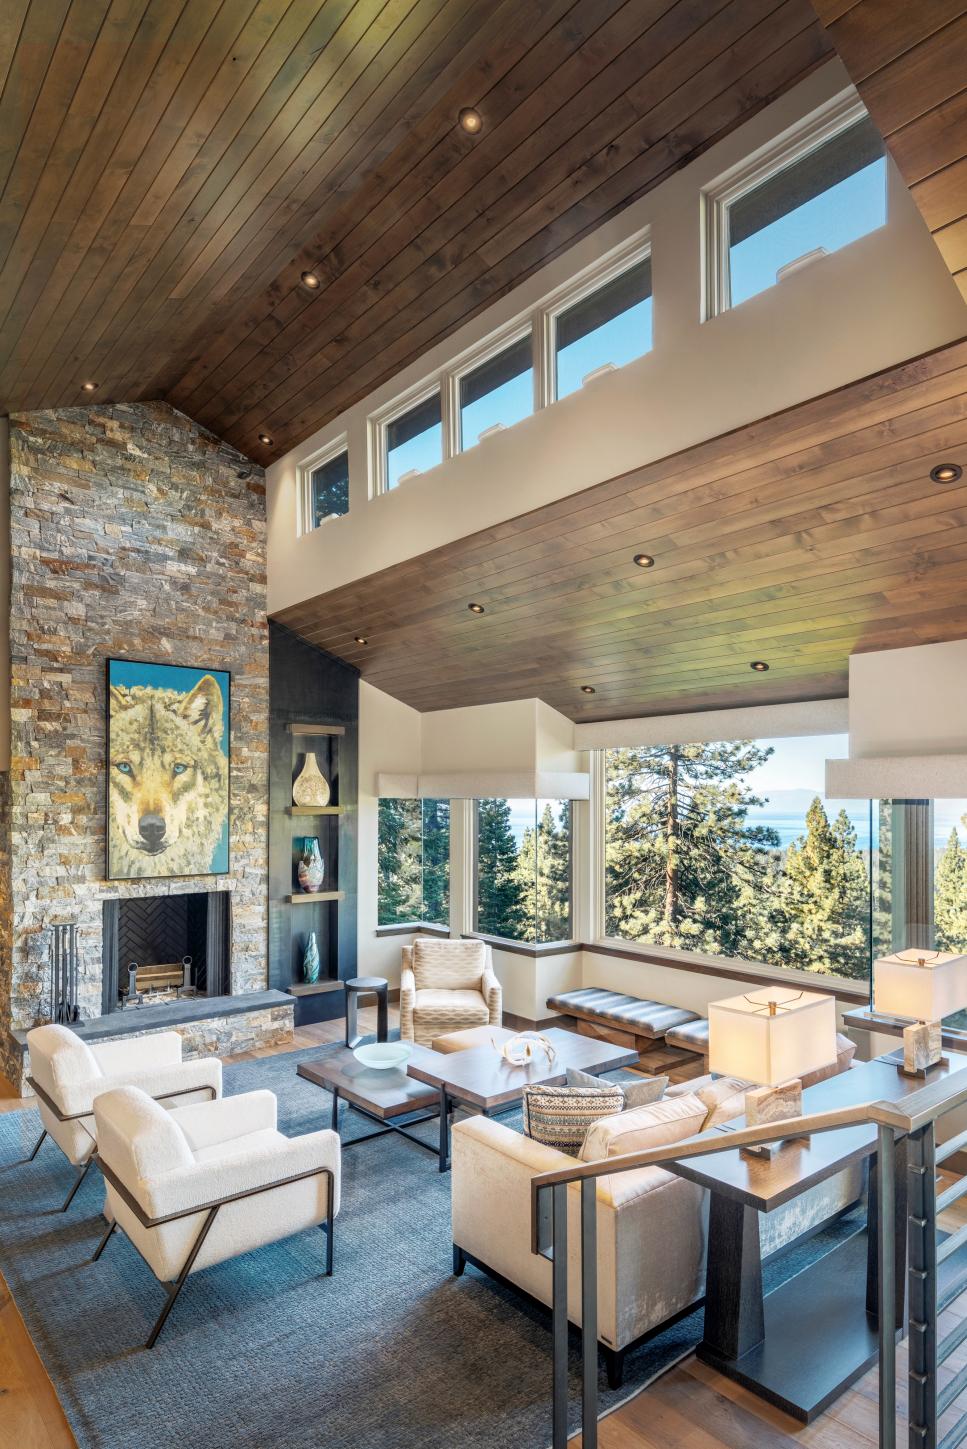 Rustic Contemporary Living Room With Clerestory Windows | HGTV